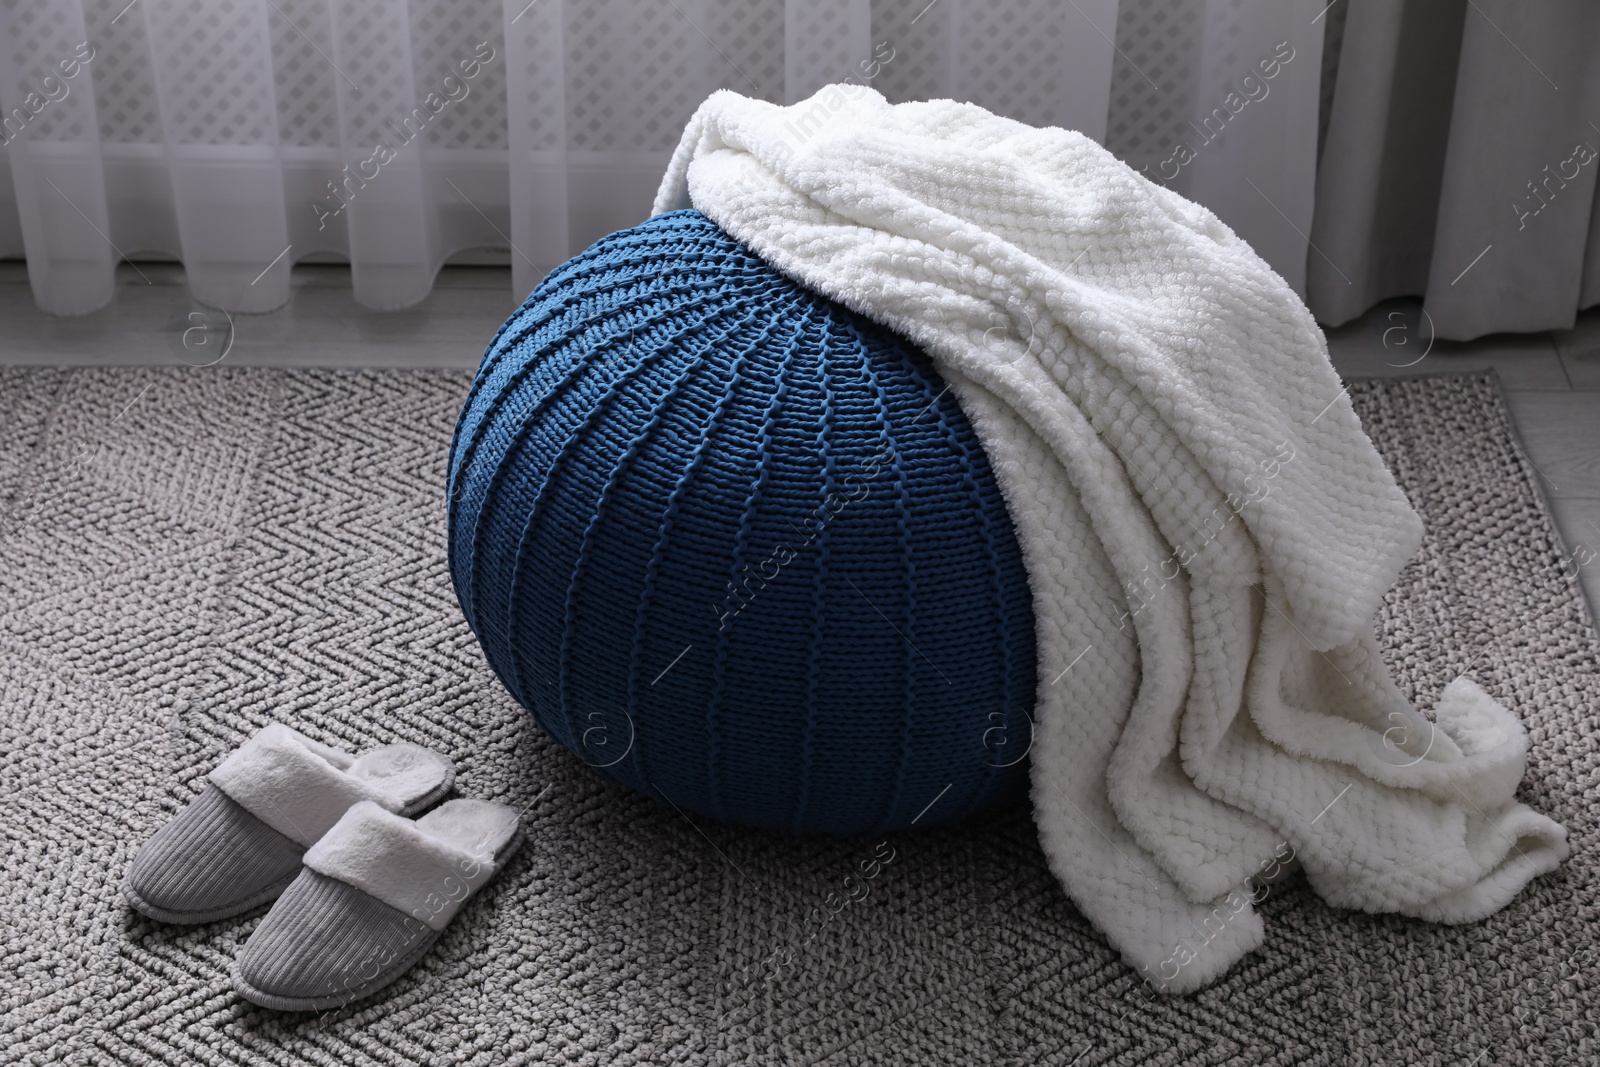 Photo of Soft blanket on stylish blue pouf and slippers in room